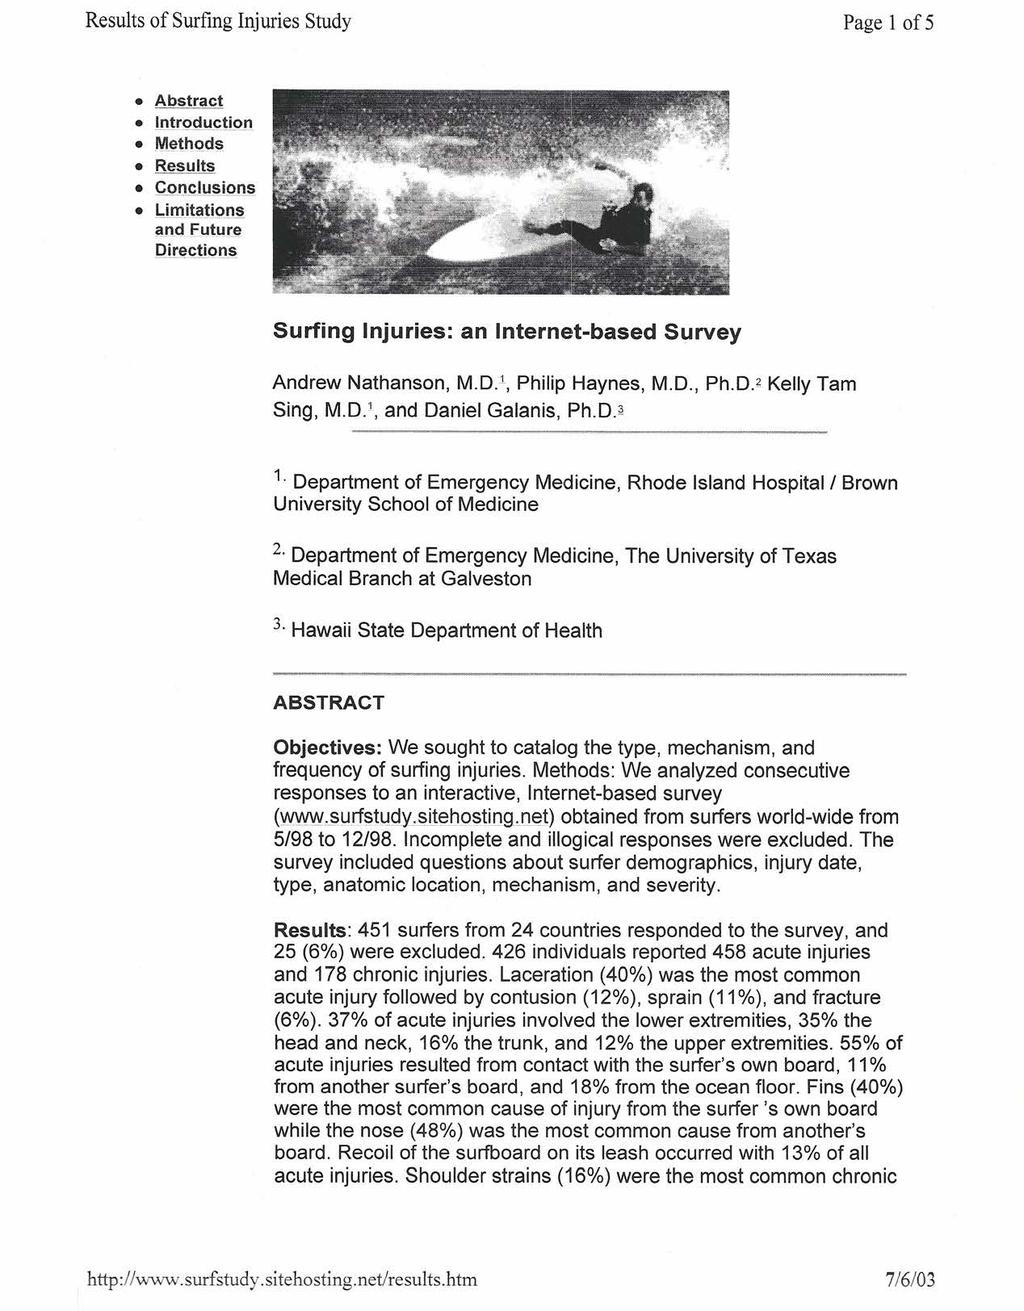 Page 1 of 5 Abstract.lntrQgYc::tion Methods Results COIJCIYSiOIJS L.imitc:tti9IJS and Future [)in~cji9ns Surfing Injuries: an Internet-based Survey Andrew Nathanson, M.D.I, Philip Haynes, M.D., Ph.D} Kelly Tam Sing, M.